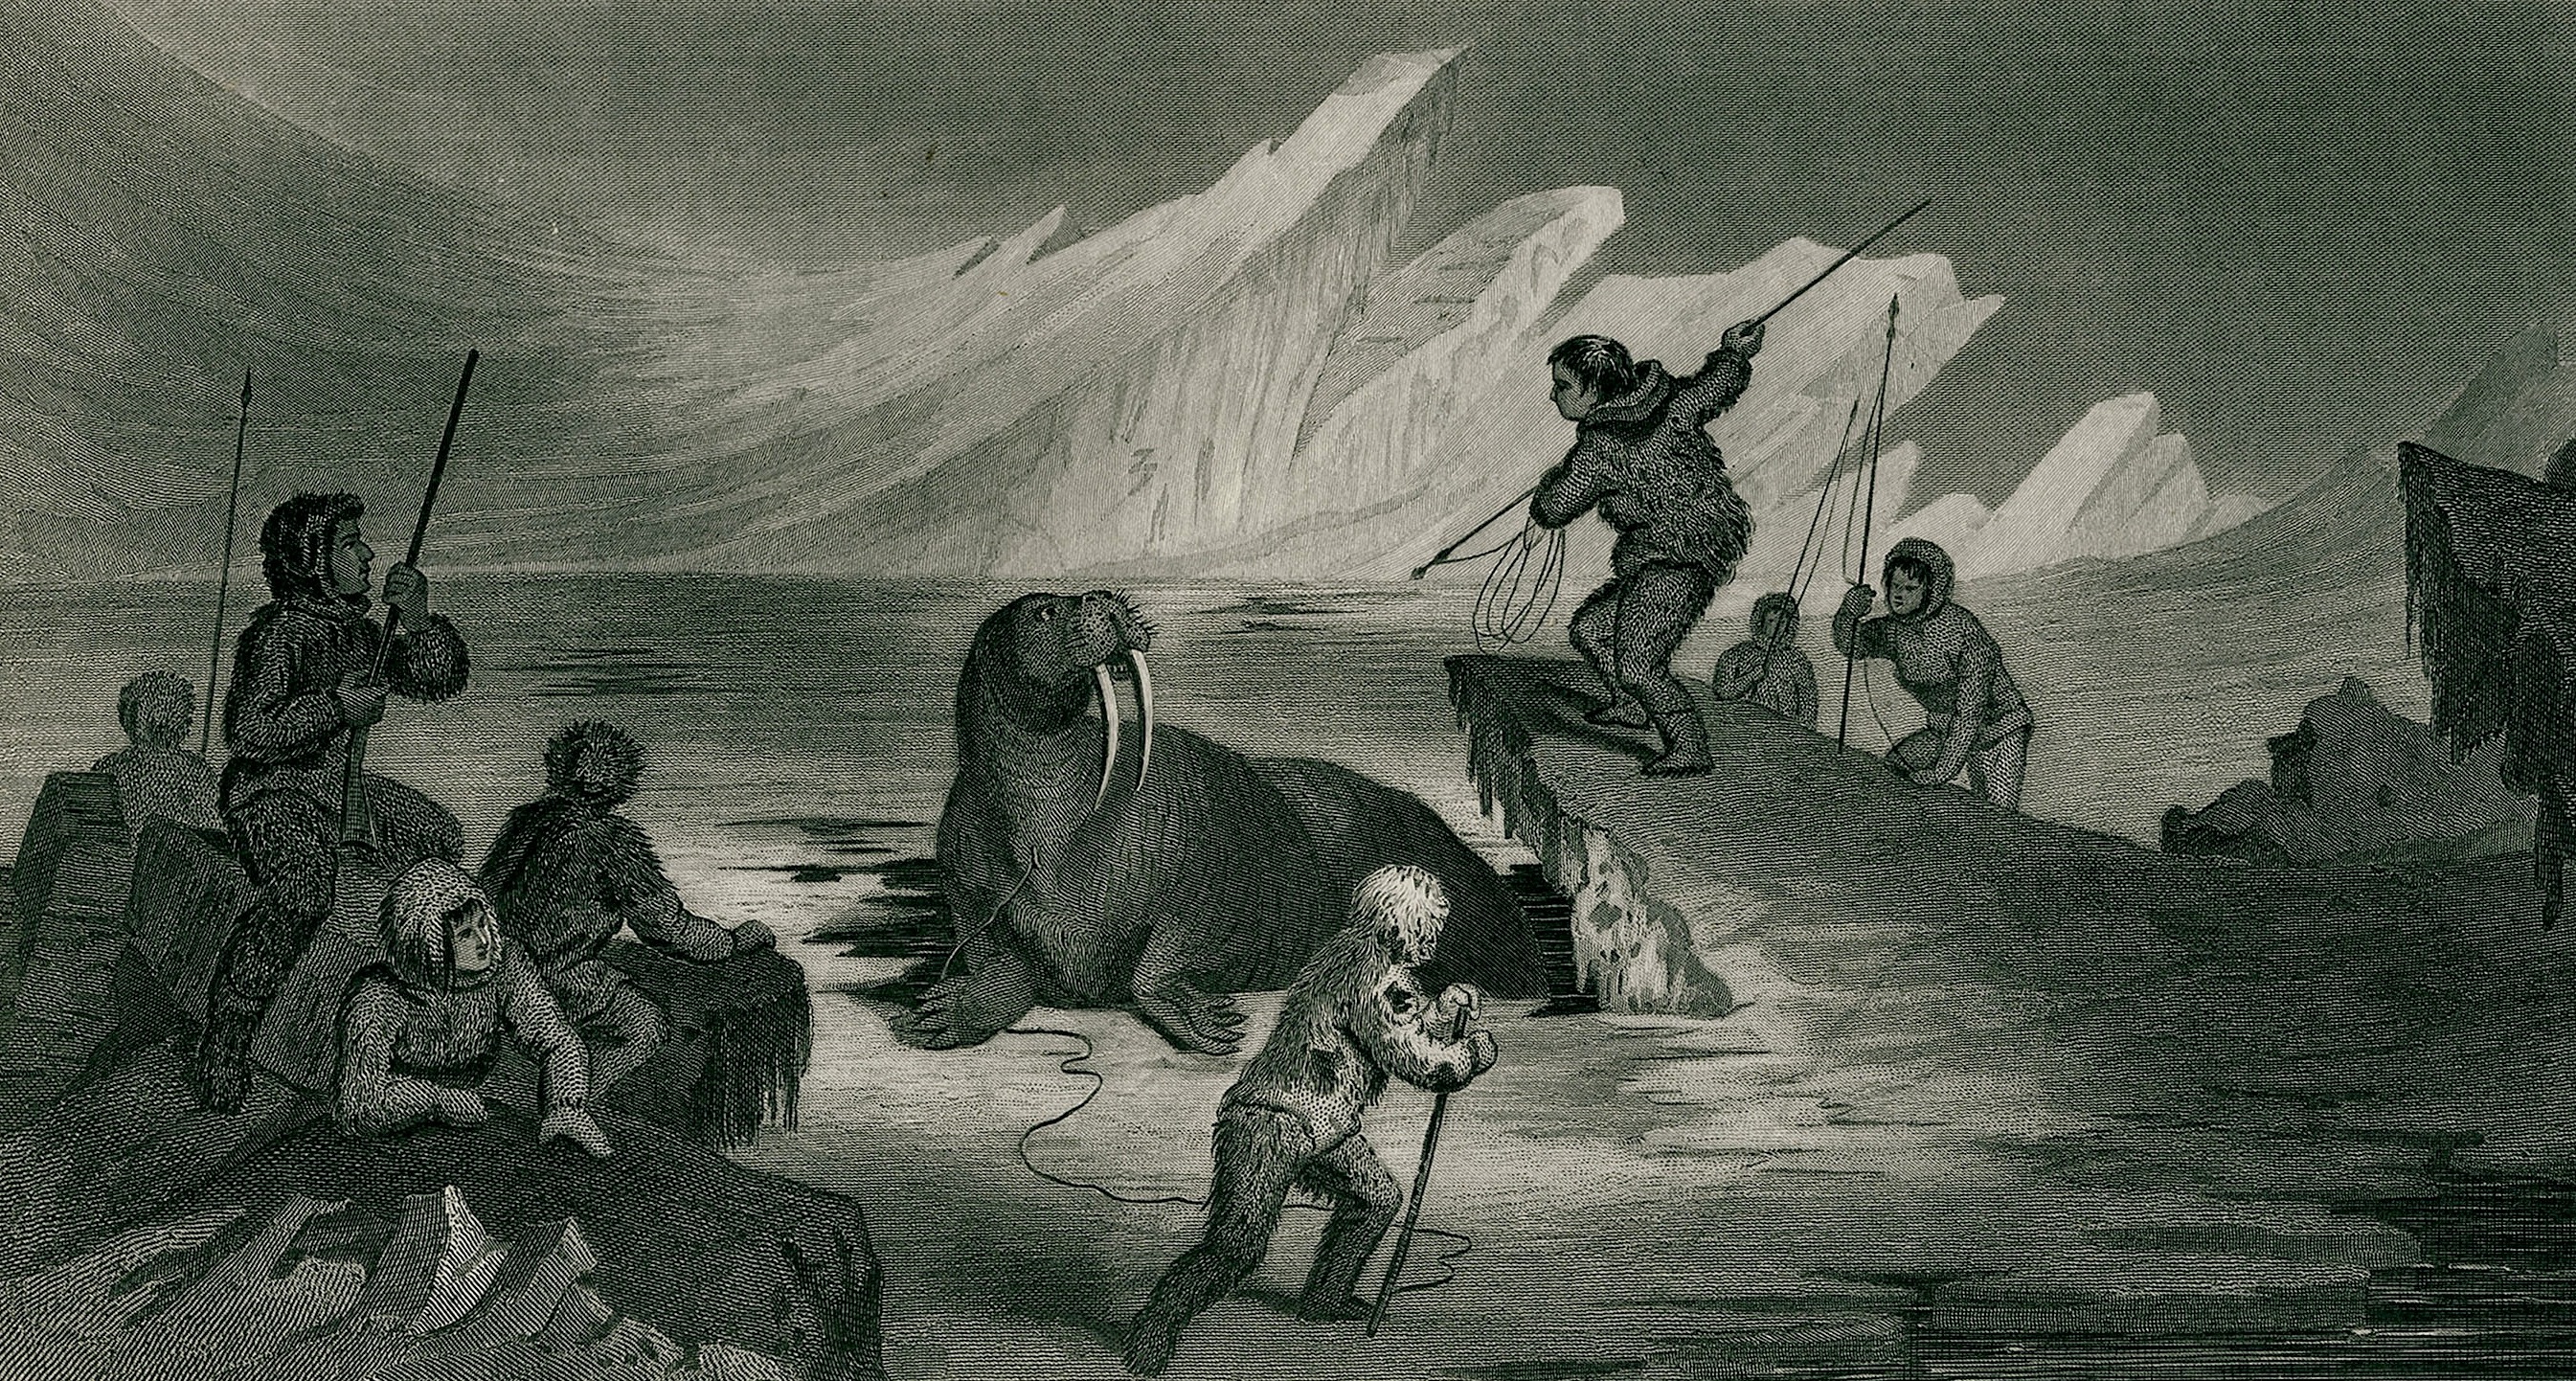 Inuit culture traditions and history